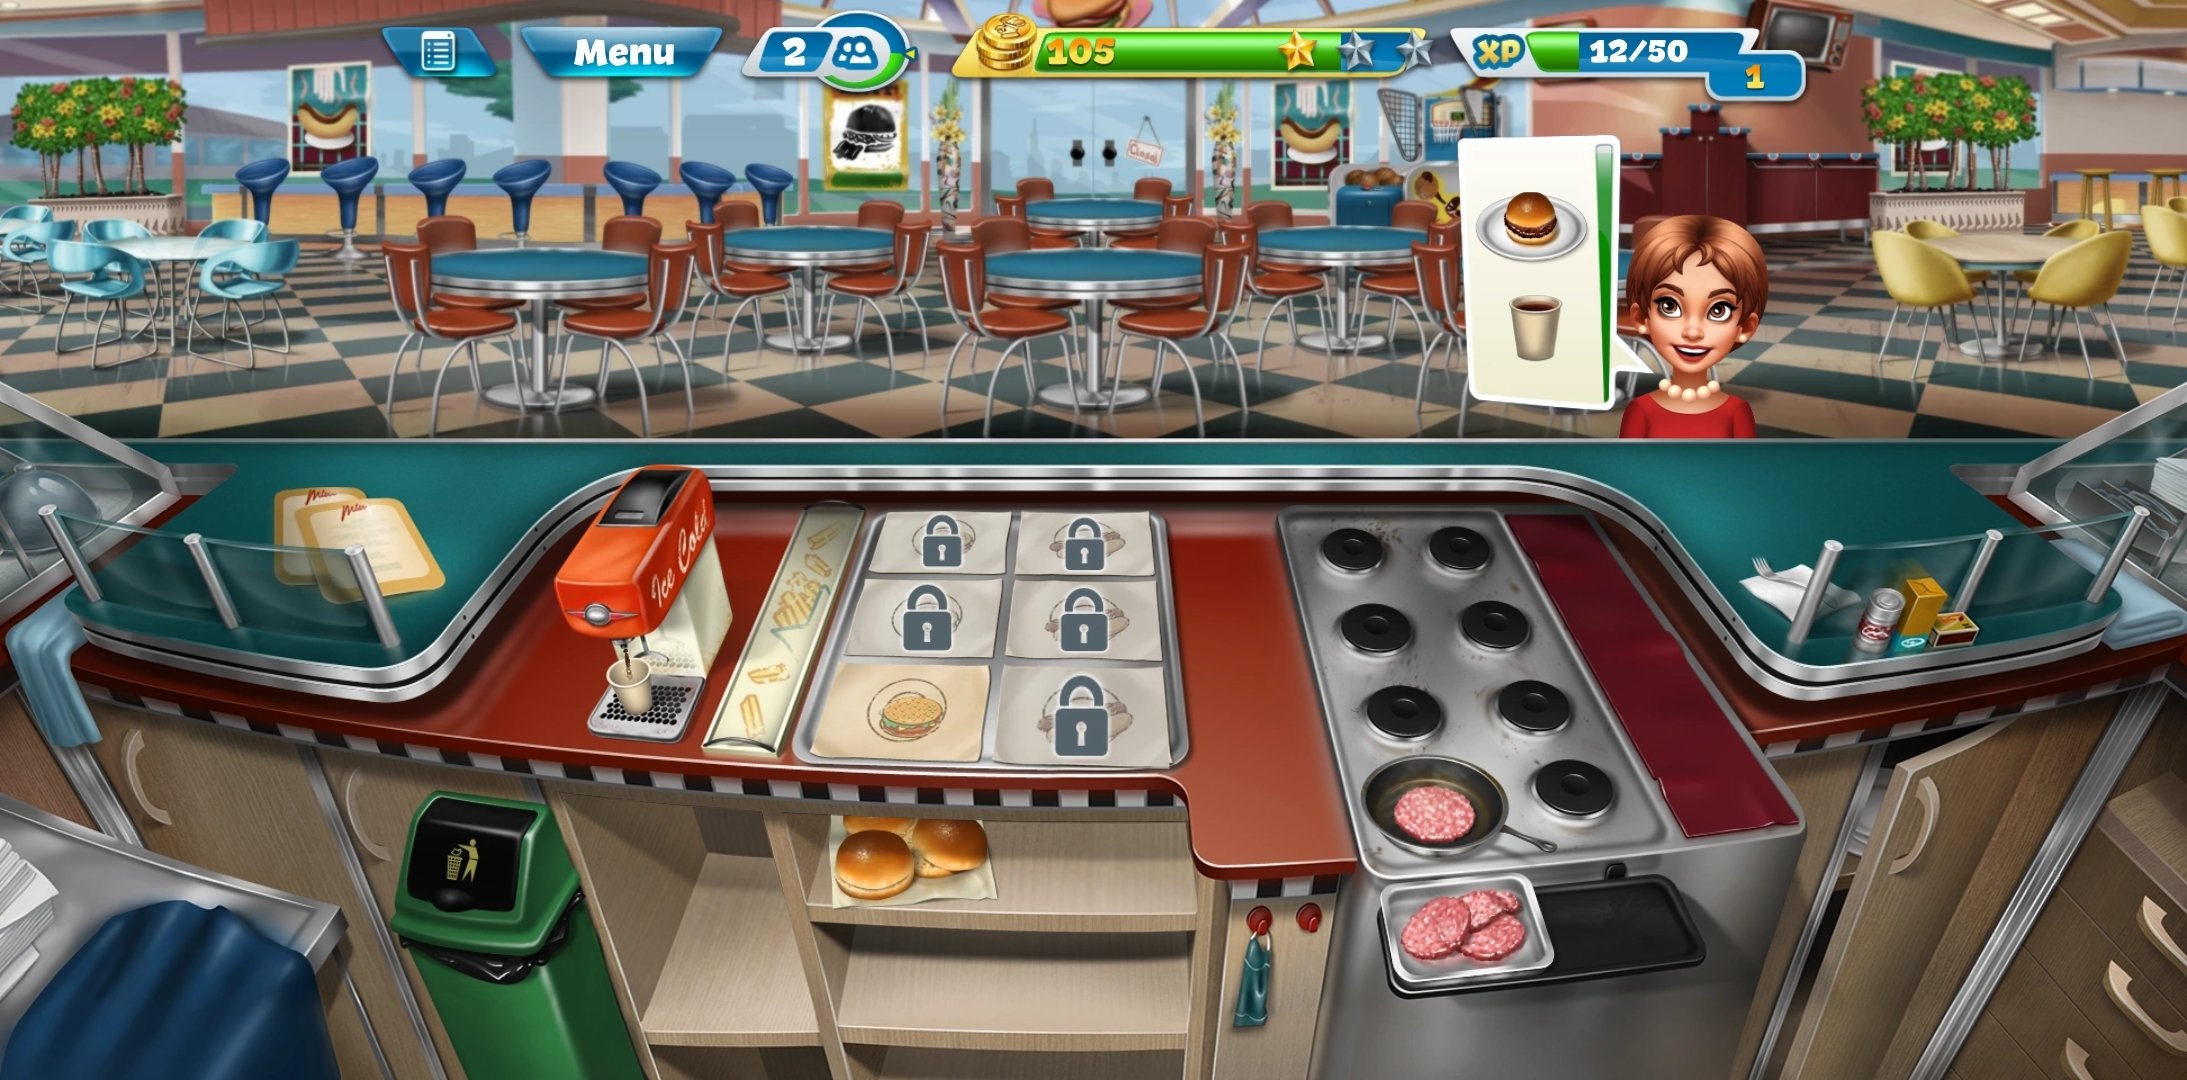 when will cooking fever amazon update again